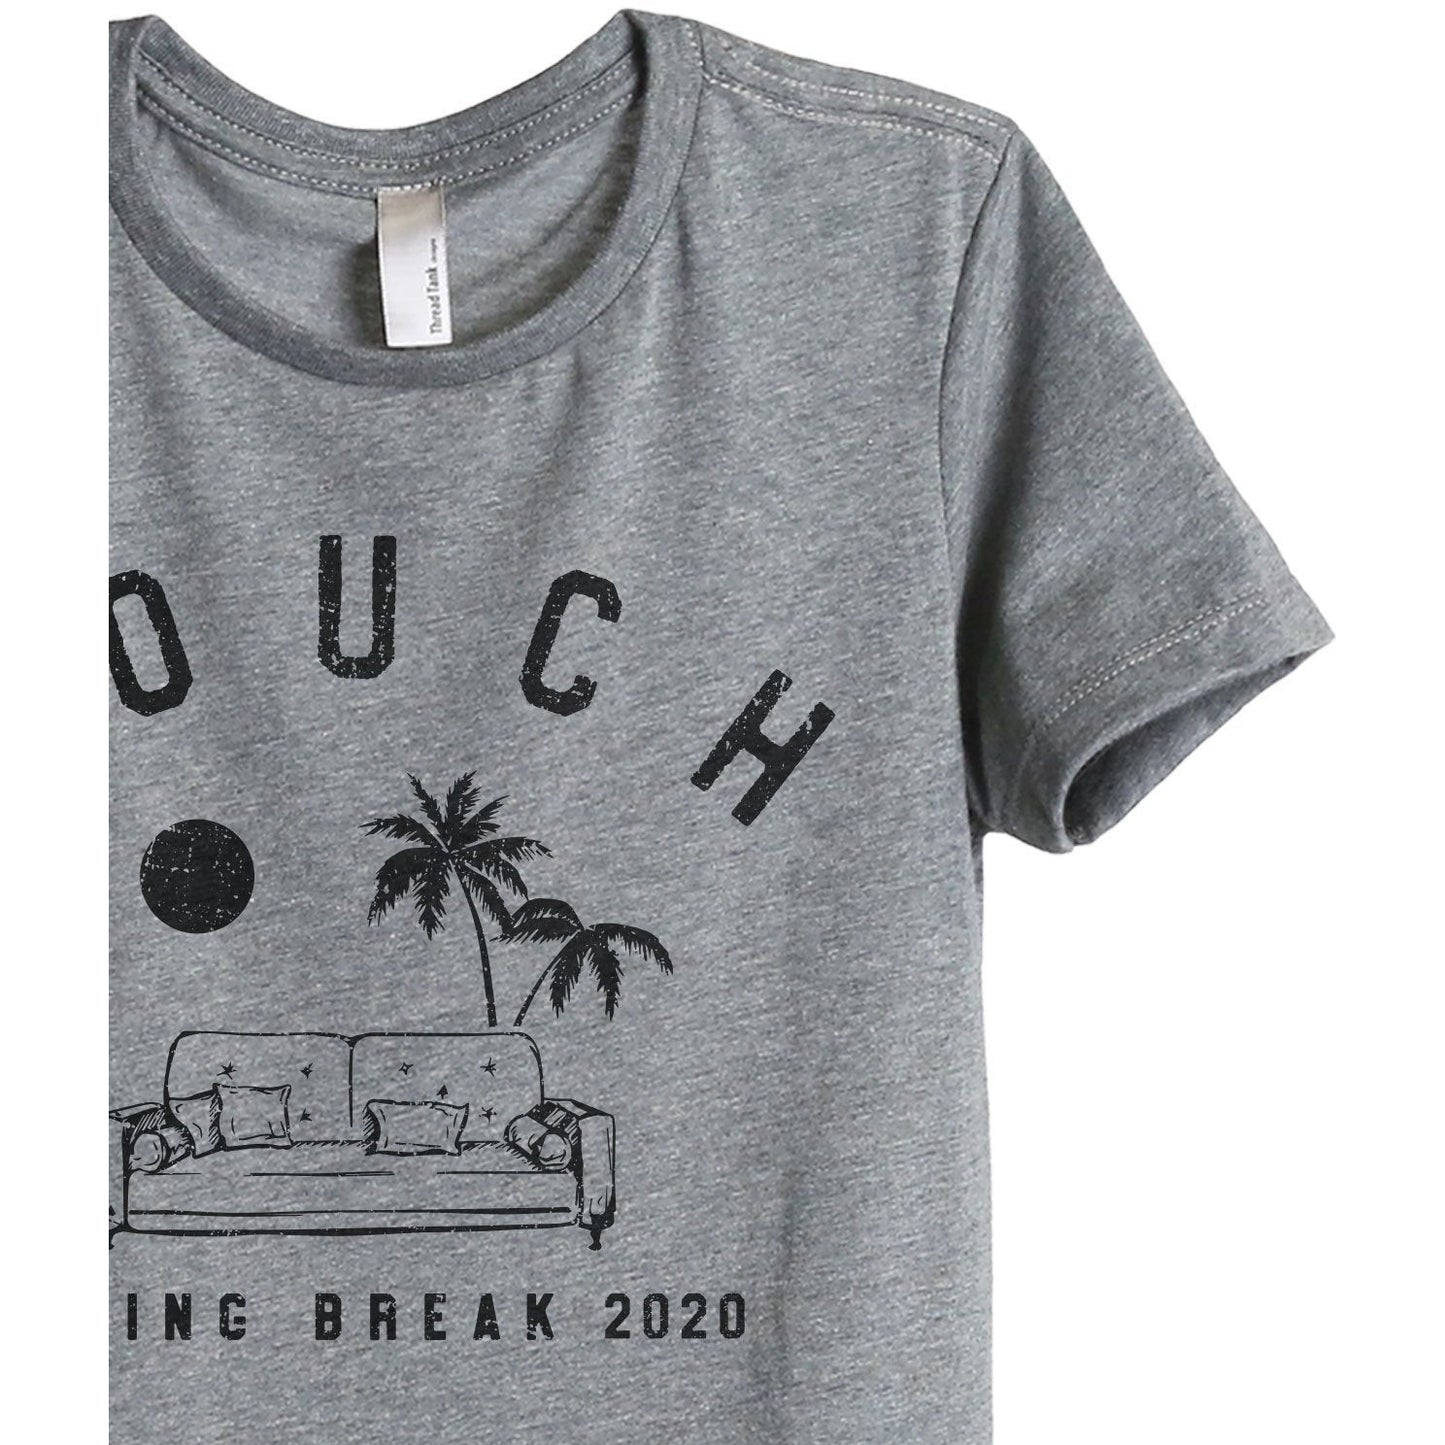 Couch Spring Break Women's Relaxed Crewneck T-Shirt Top Tee Heather Grey Zoom Details
